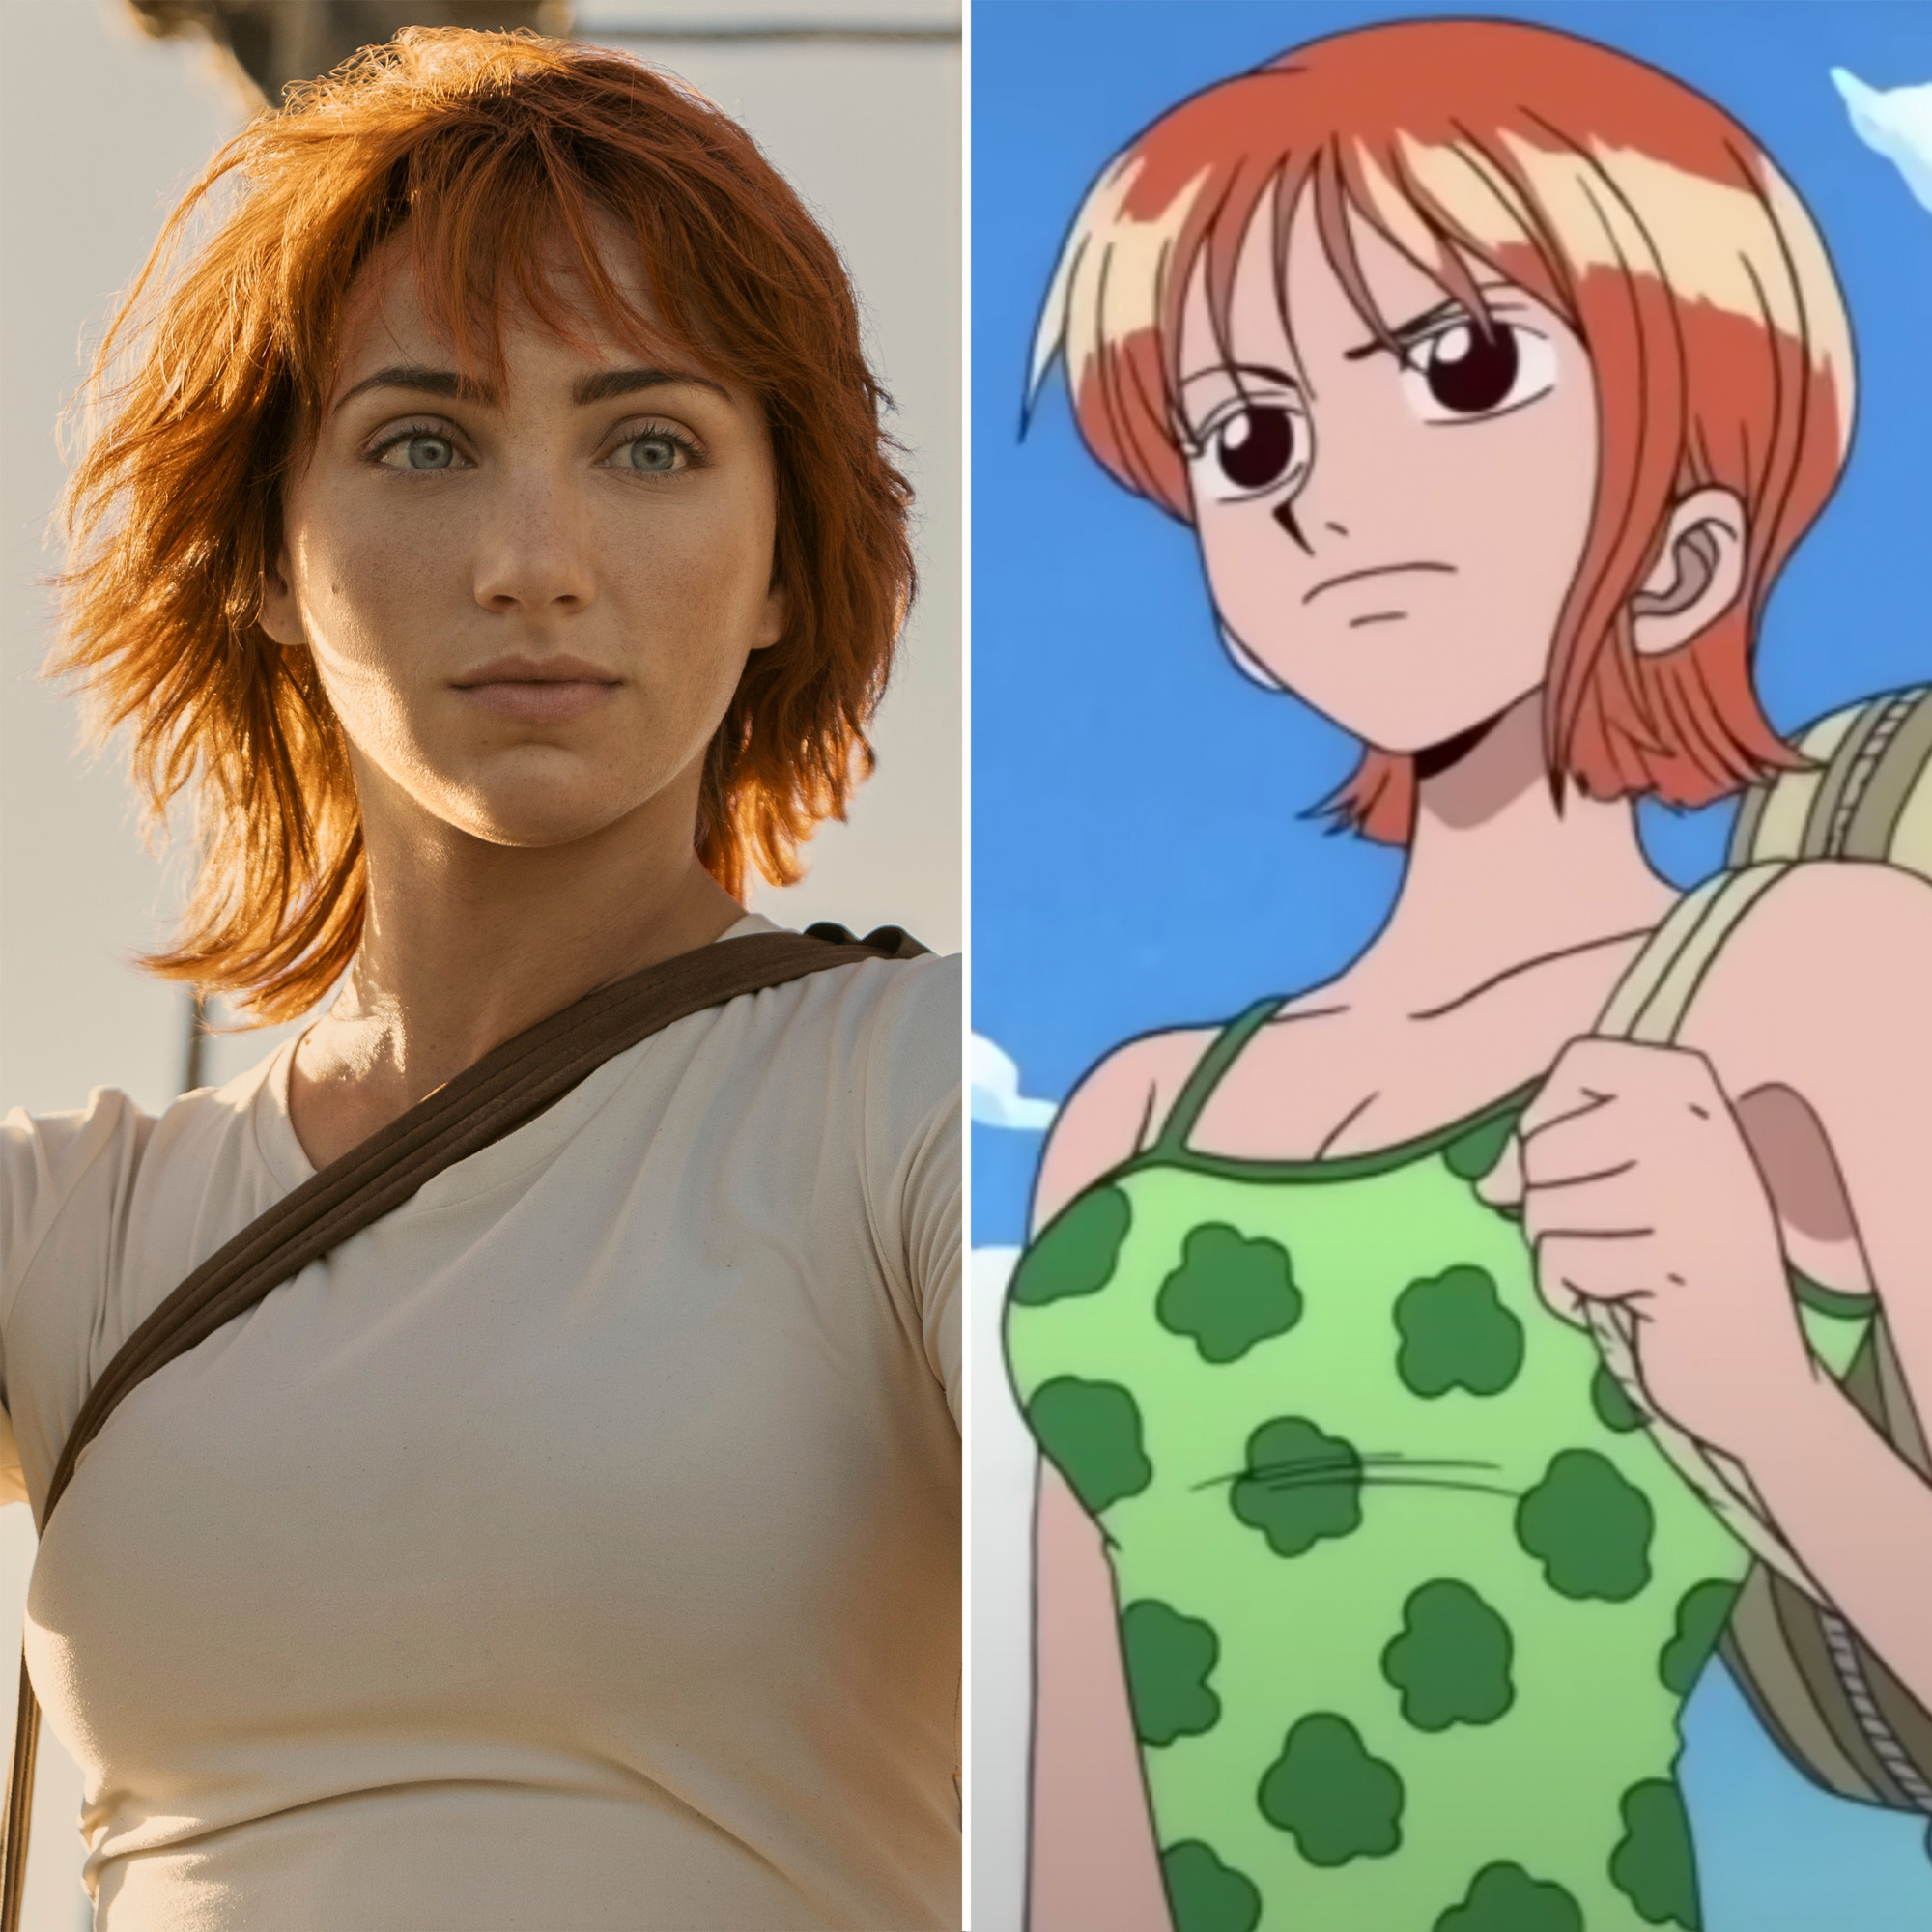 One Piece Live Action vs Anime  Nami ask Luffy for Help 